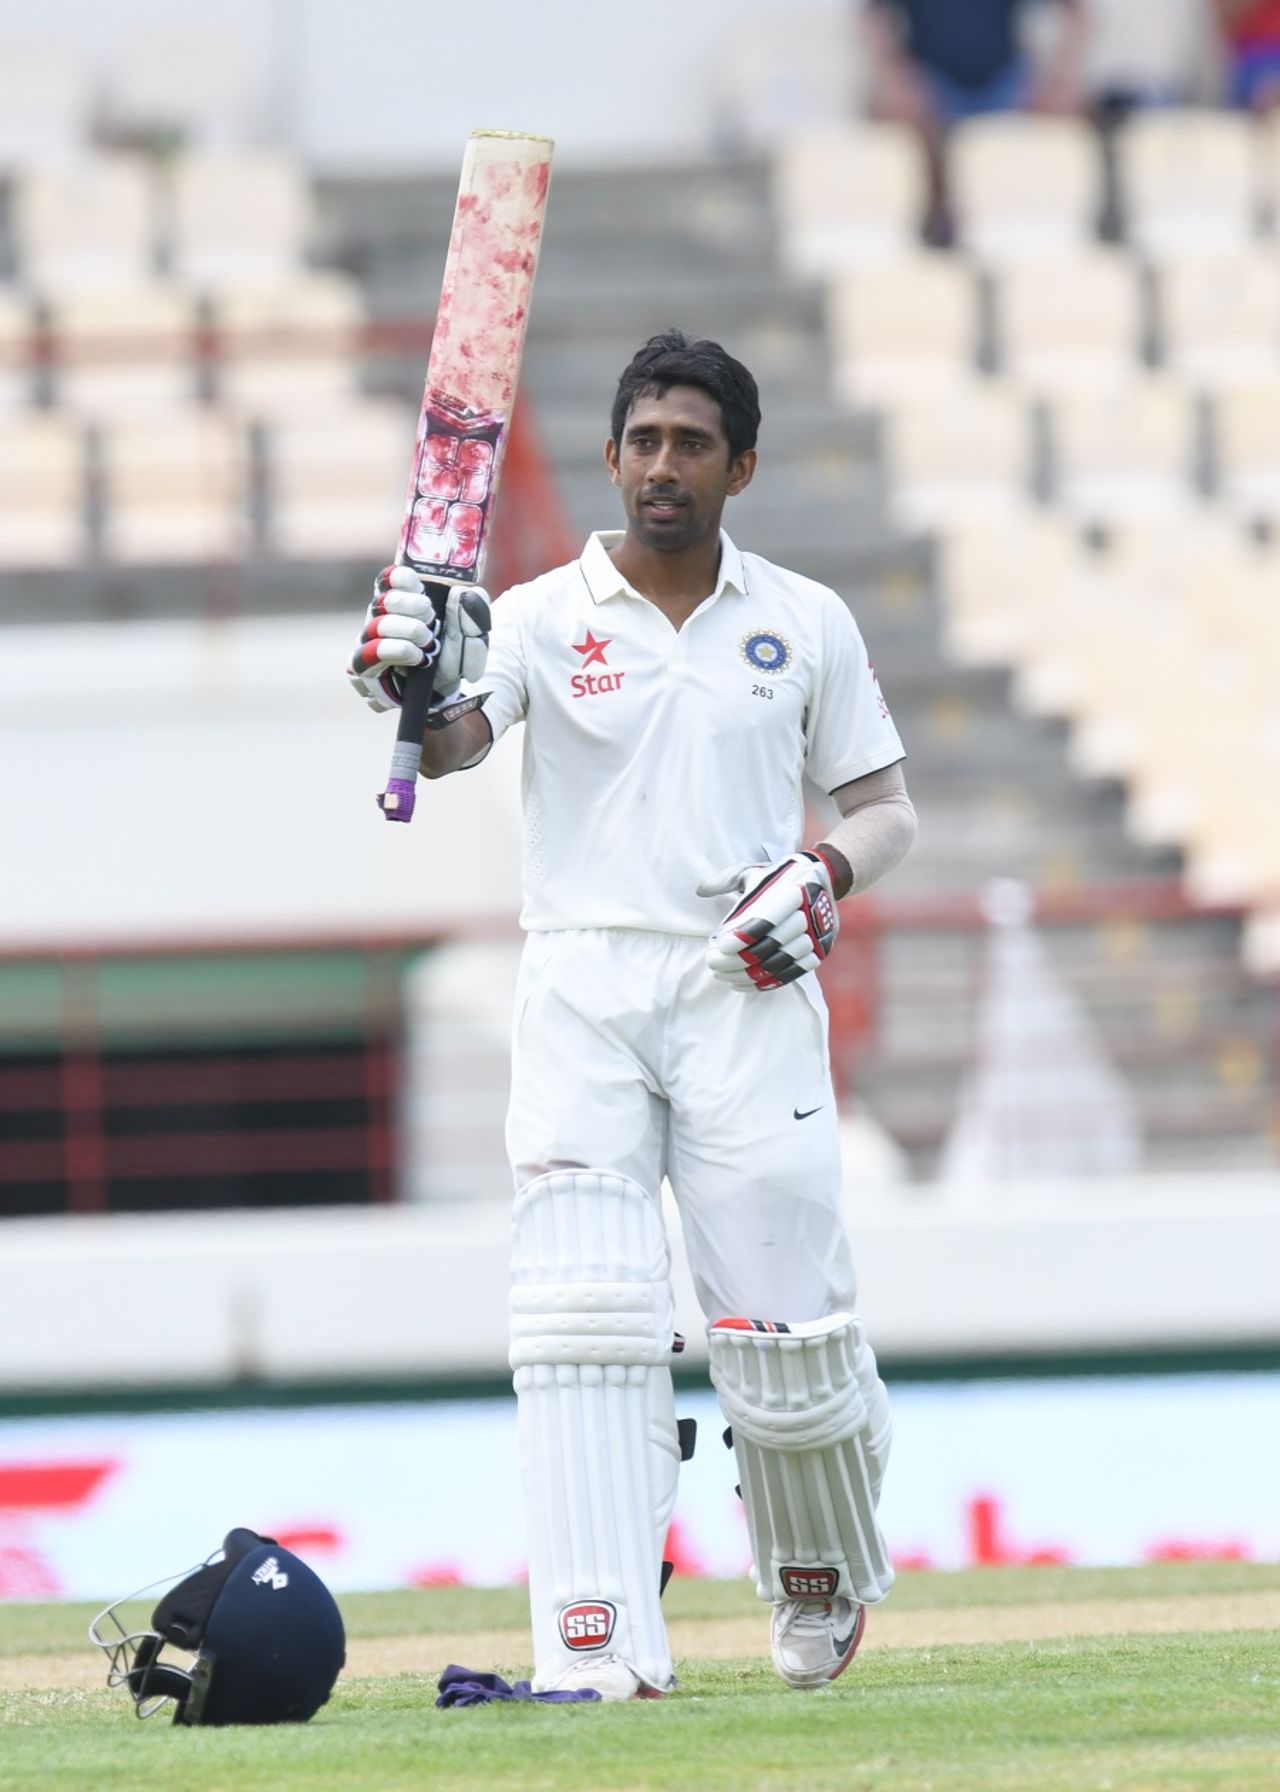 Wriddhiman Saha celebrates after raising his maiden Test century, West Indies v India, 3rd Test, Gros Islet, 2nd day, August 10, 2016